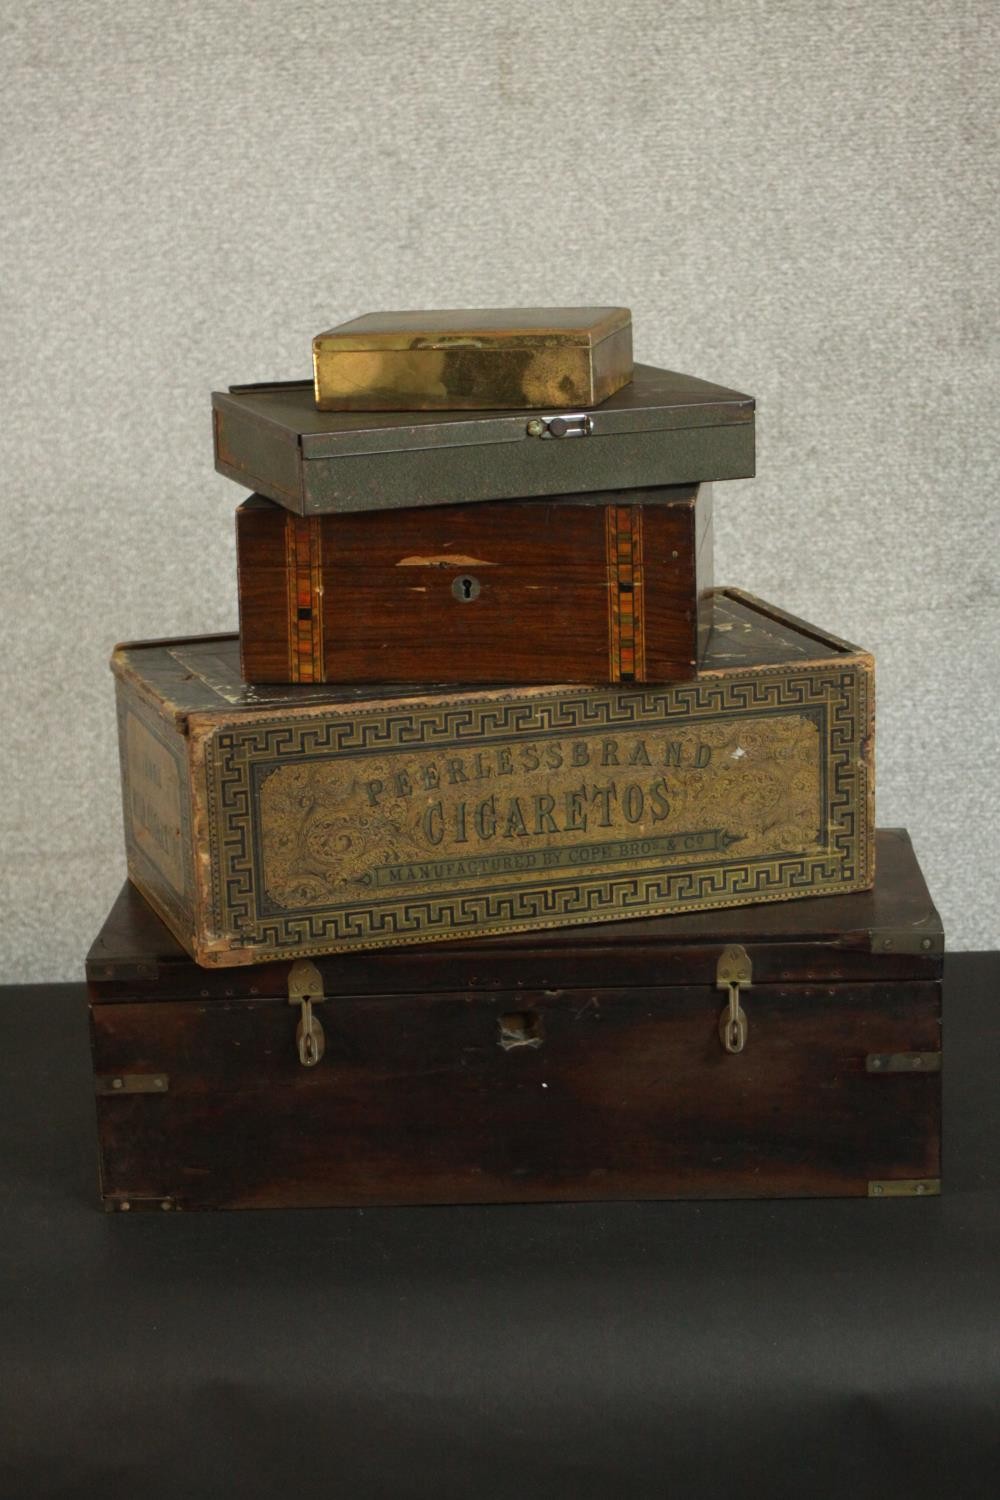 A collection of boxes, including a painted metal box, a vintage cigarette box, a large mahogany